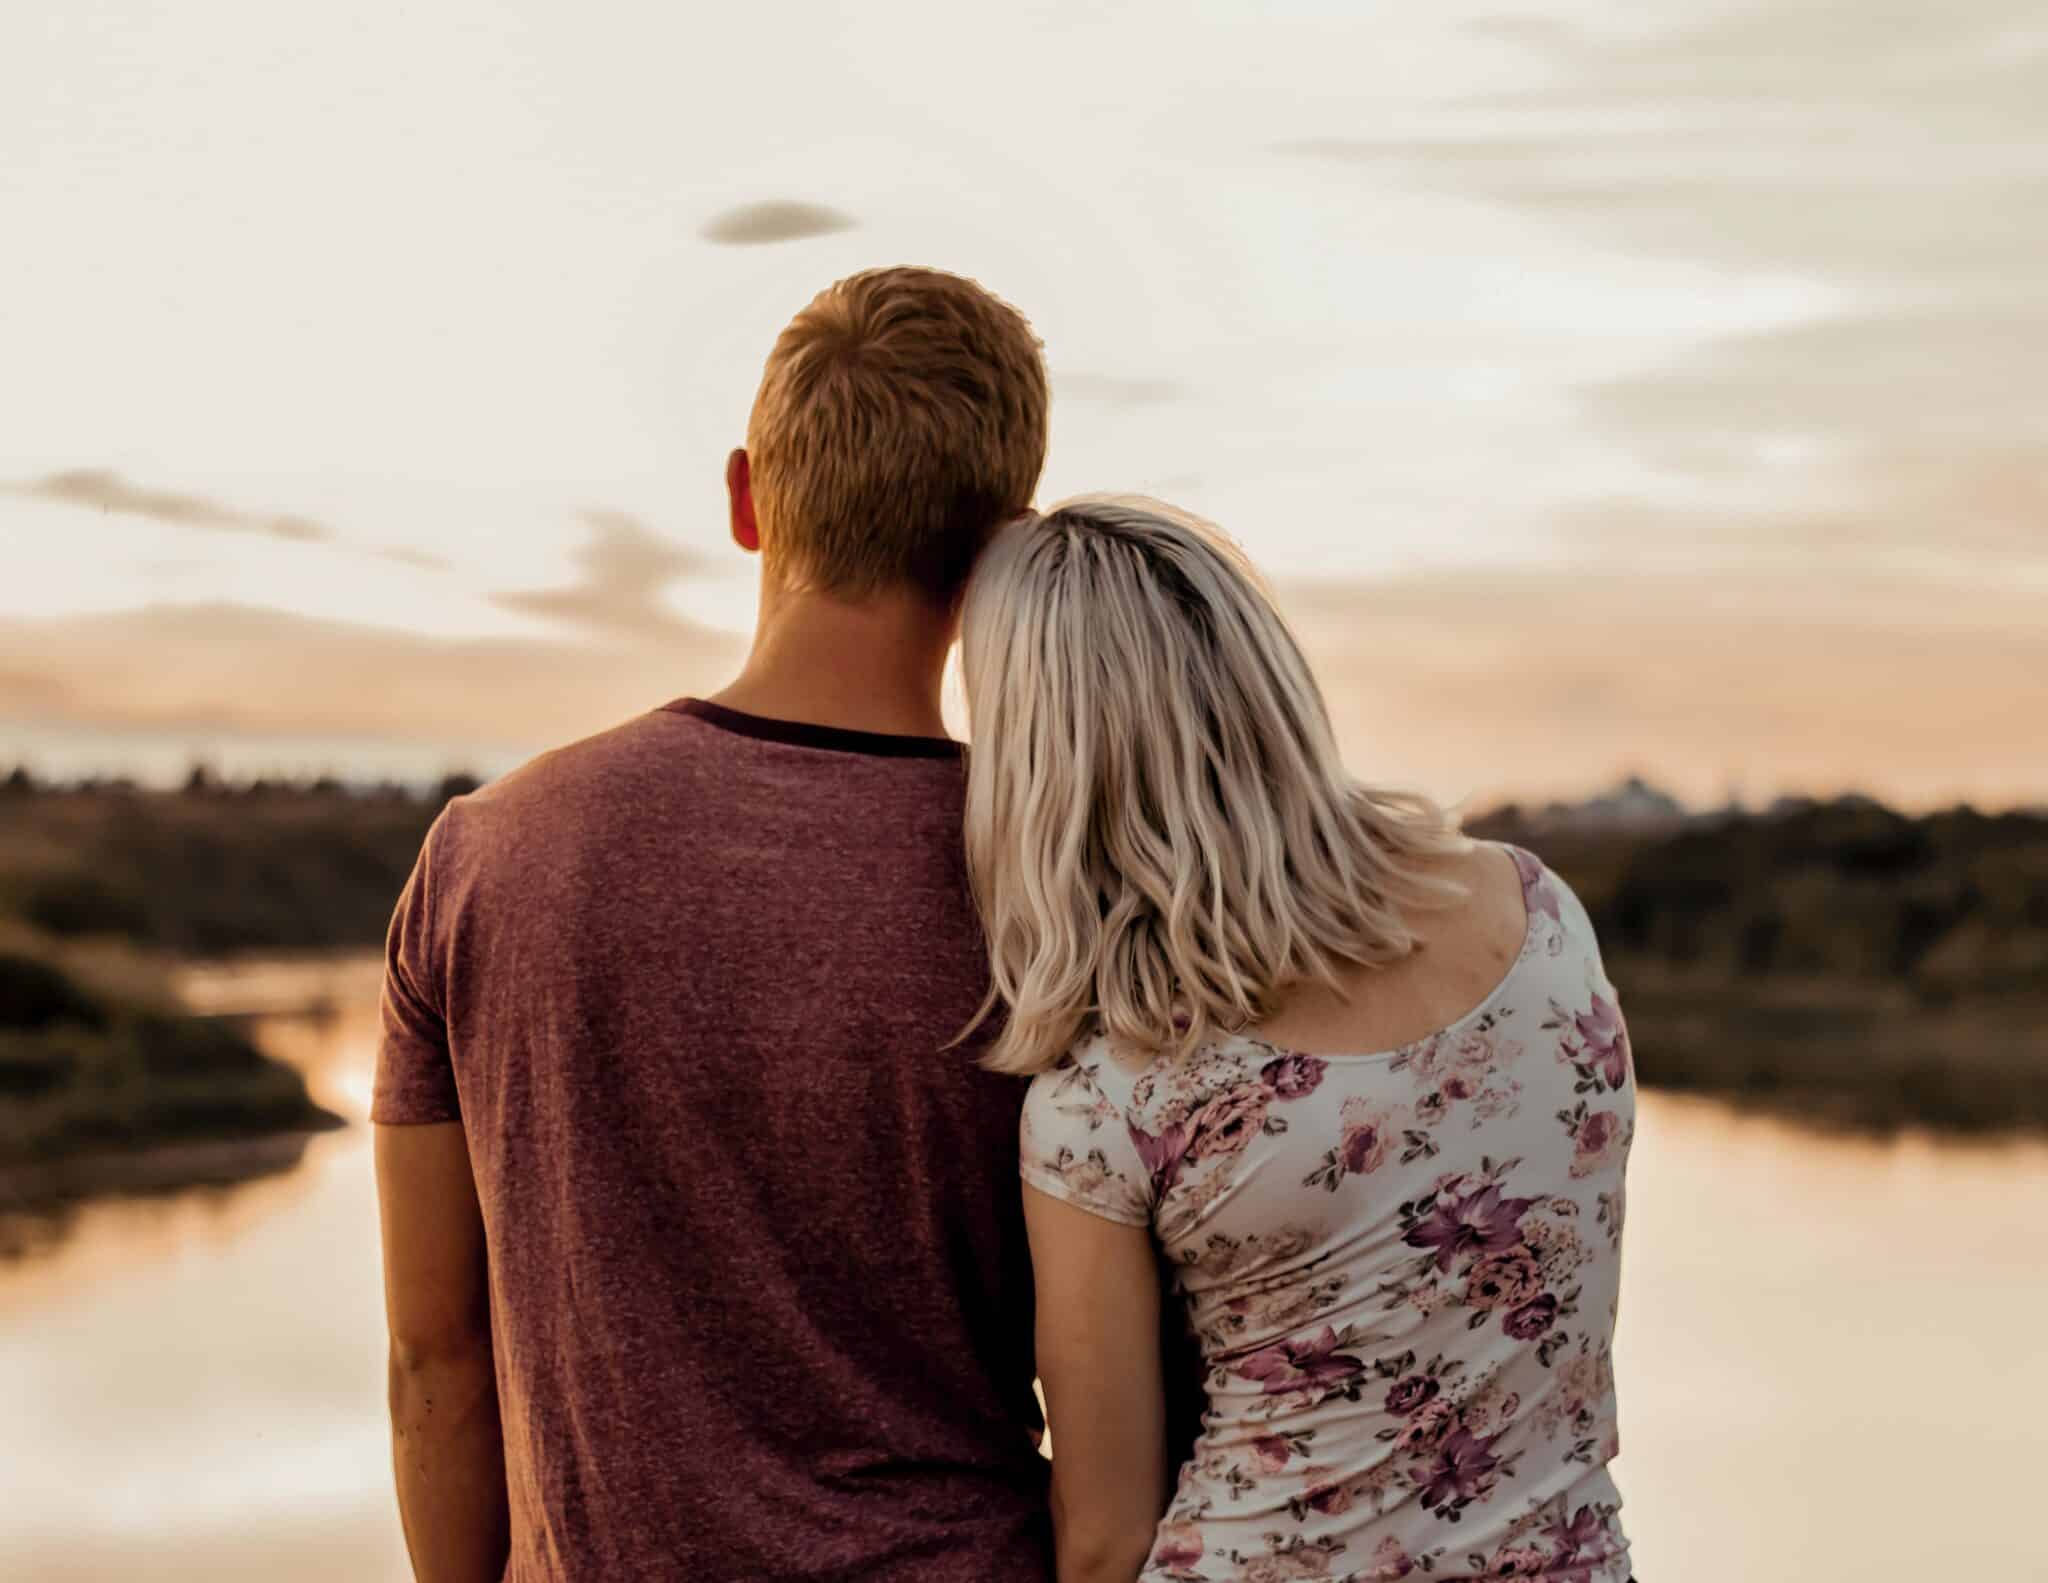 Man and woman looking at the sunset |n Photo by Mindy Sabiston on Unsplash